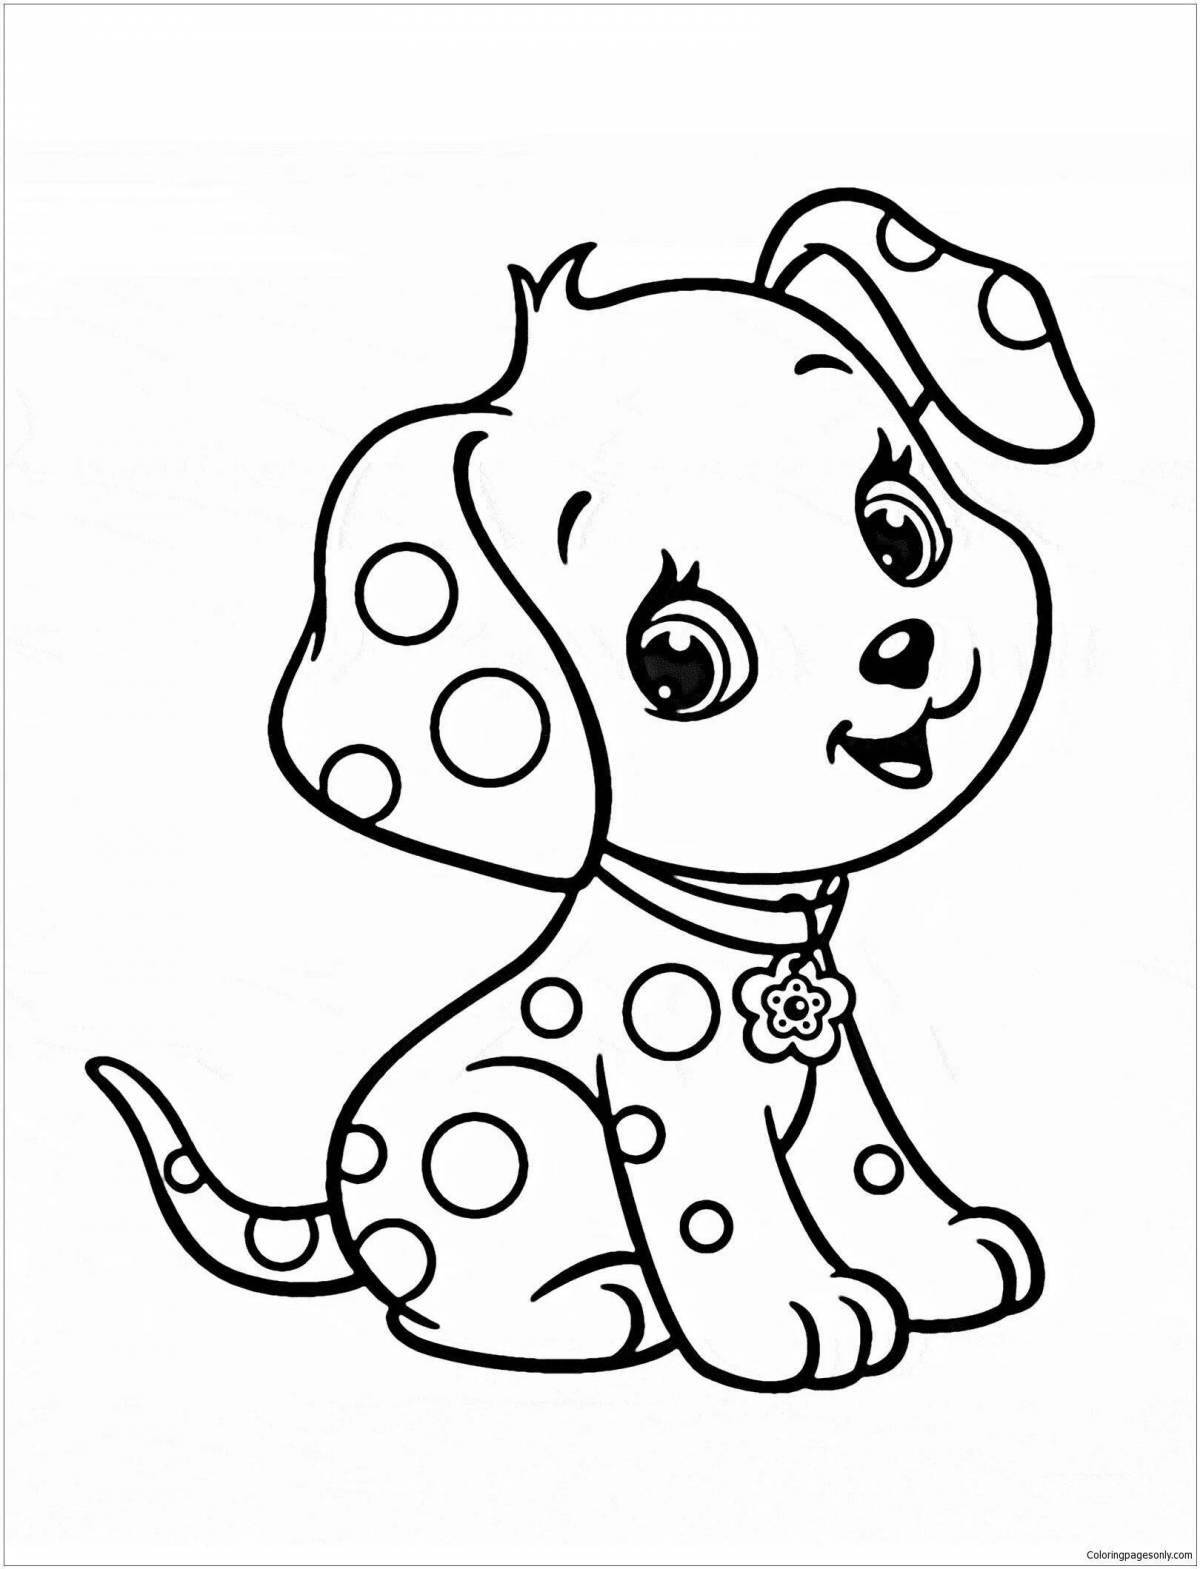 Coloring dog for children 7-8 years old